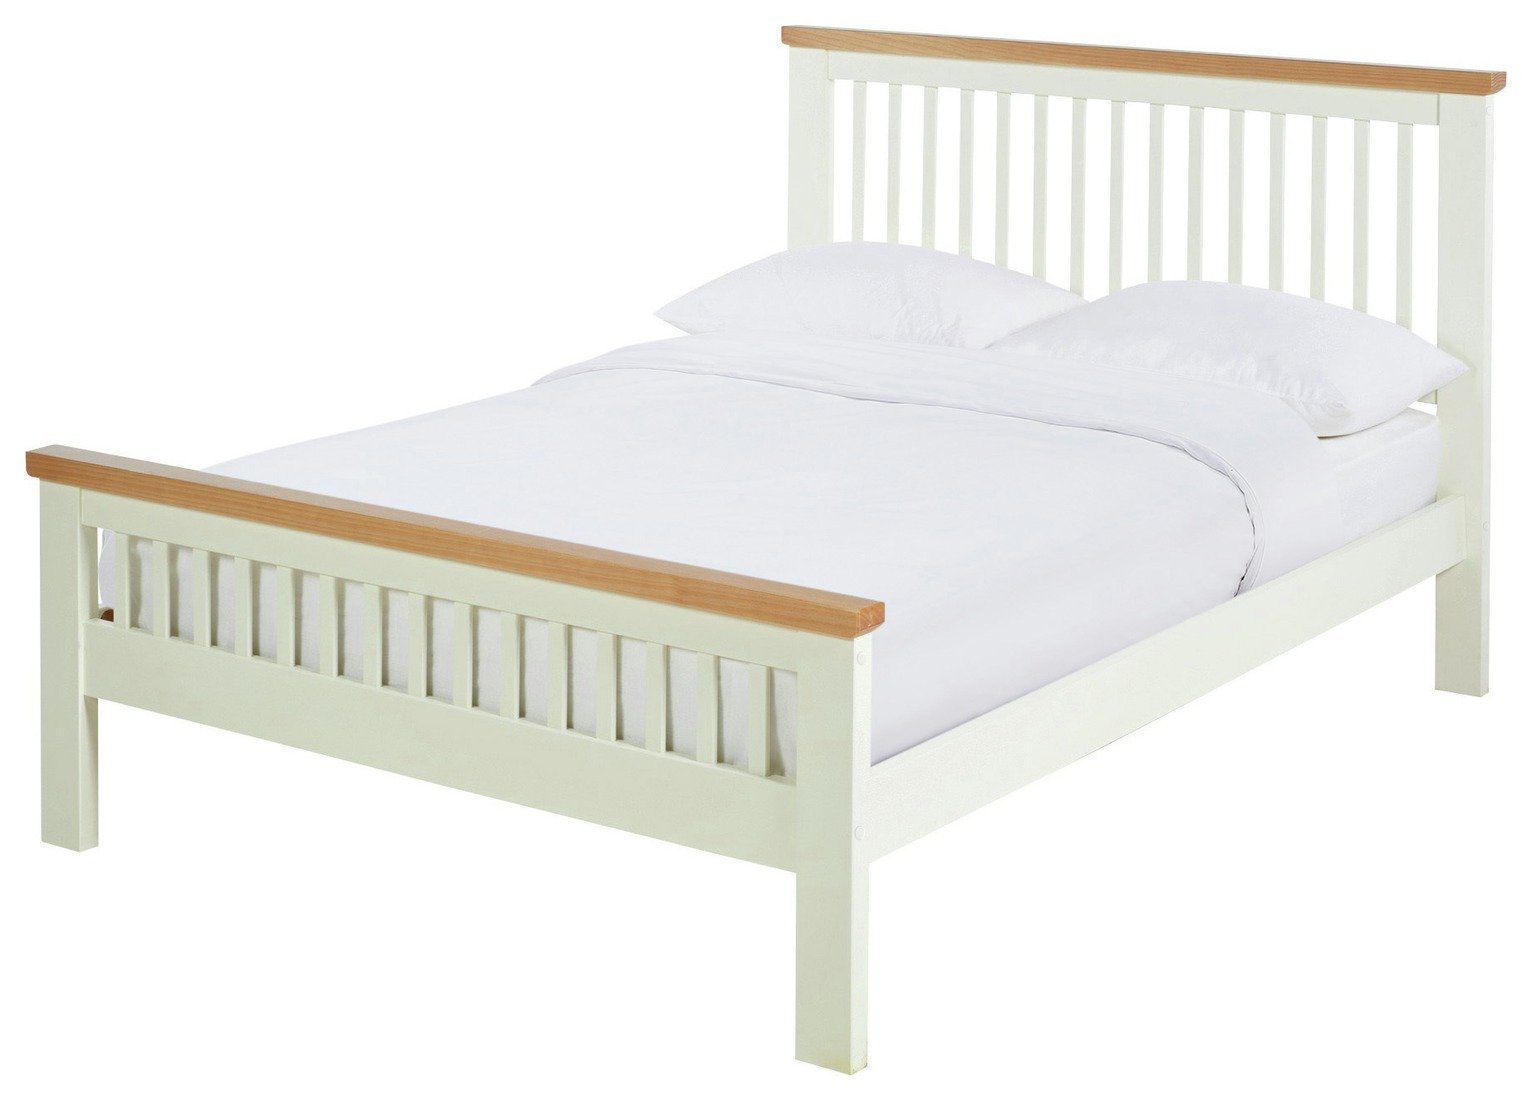 Argos Home Aubrey Double Wooden Bed Frame - Two Tone